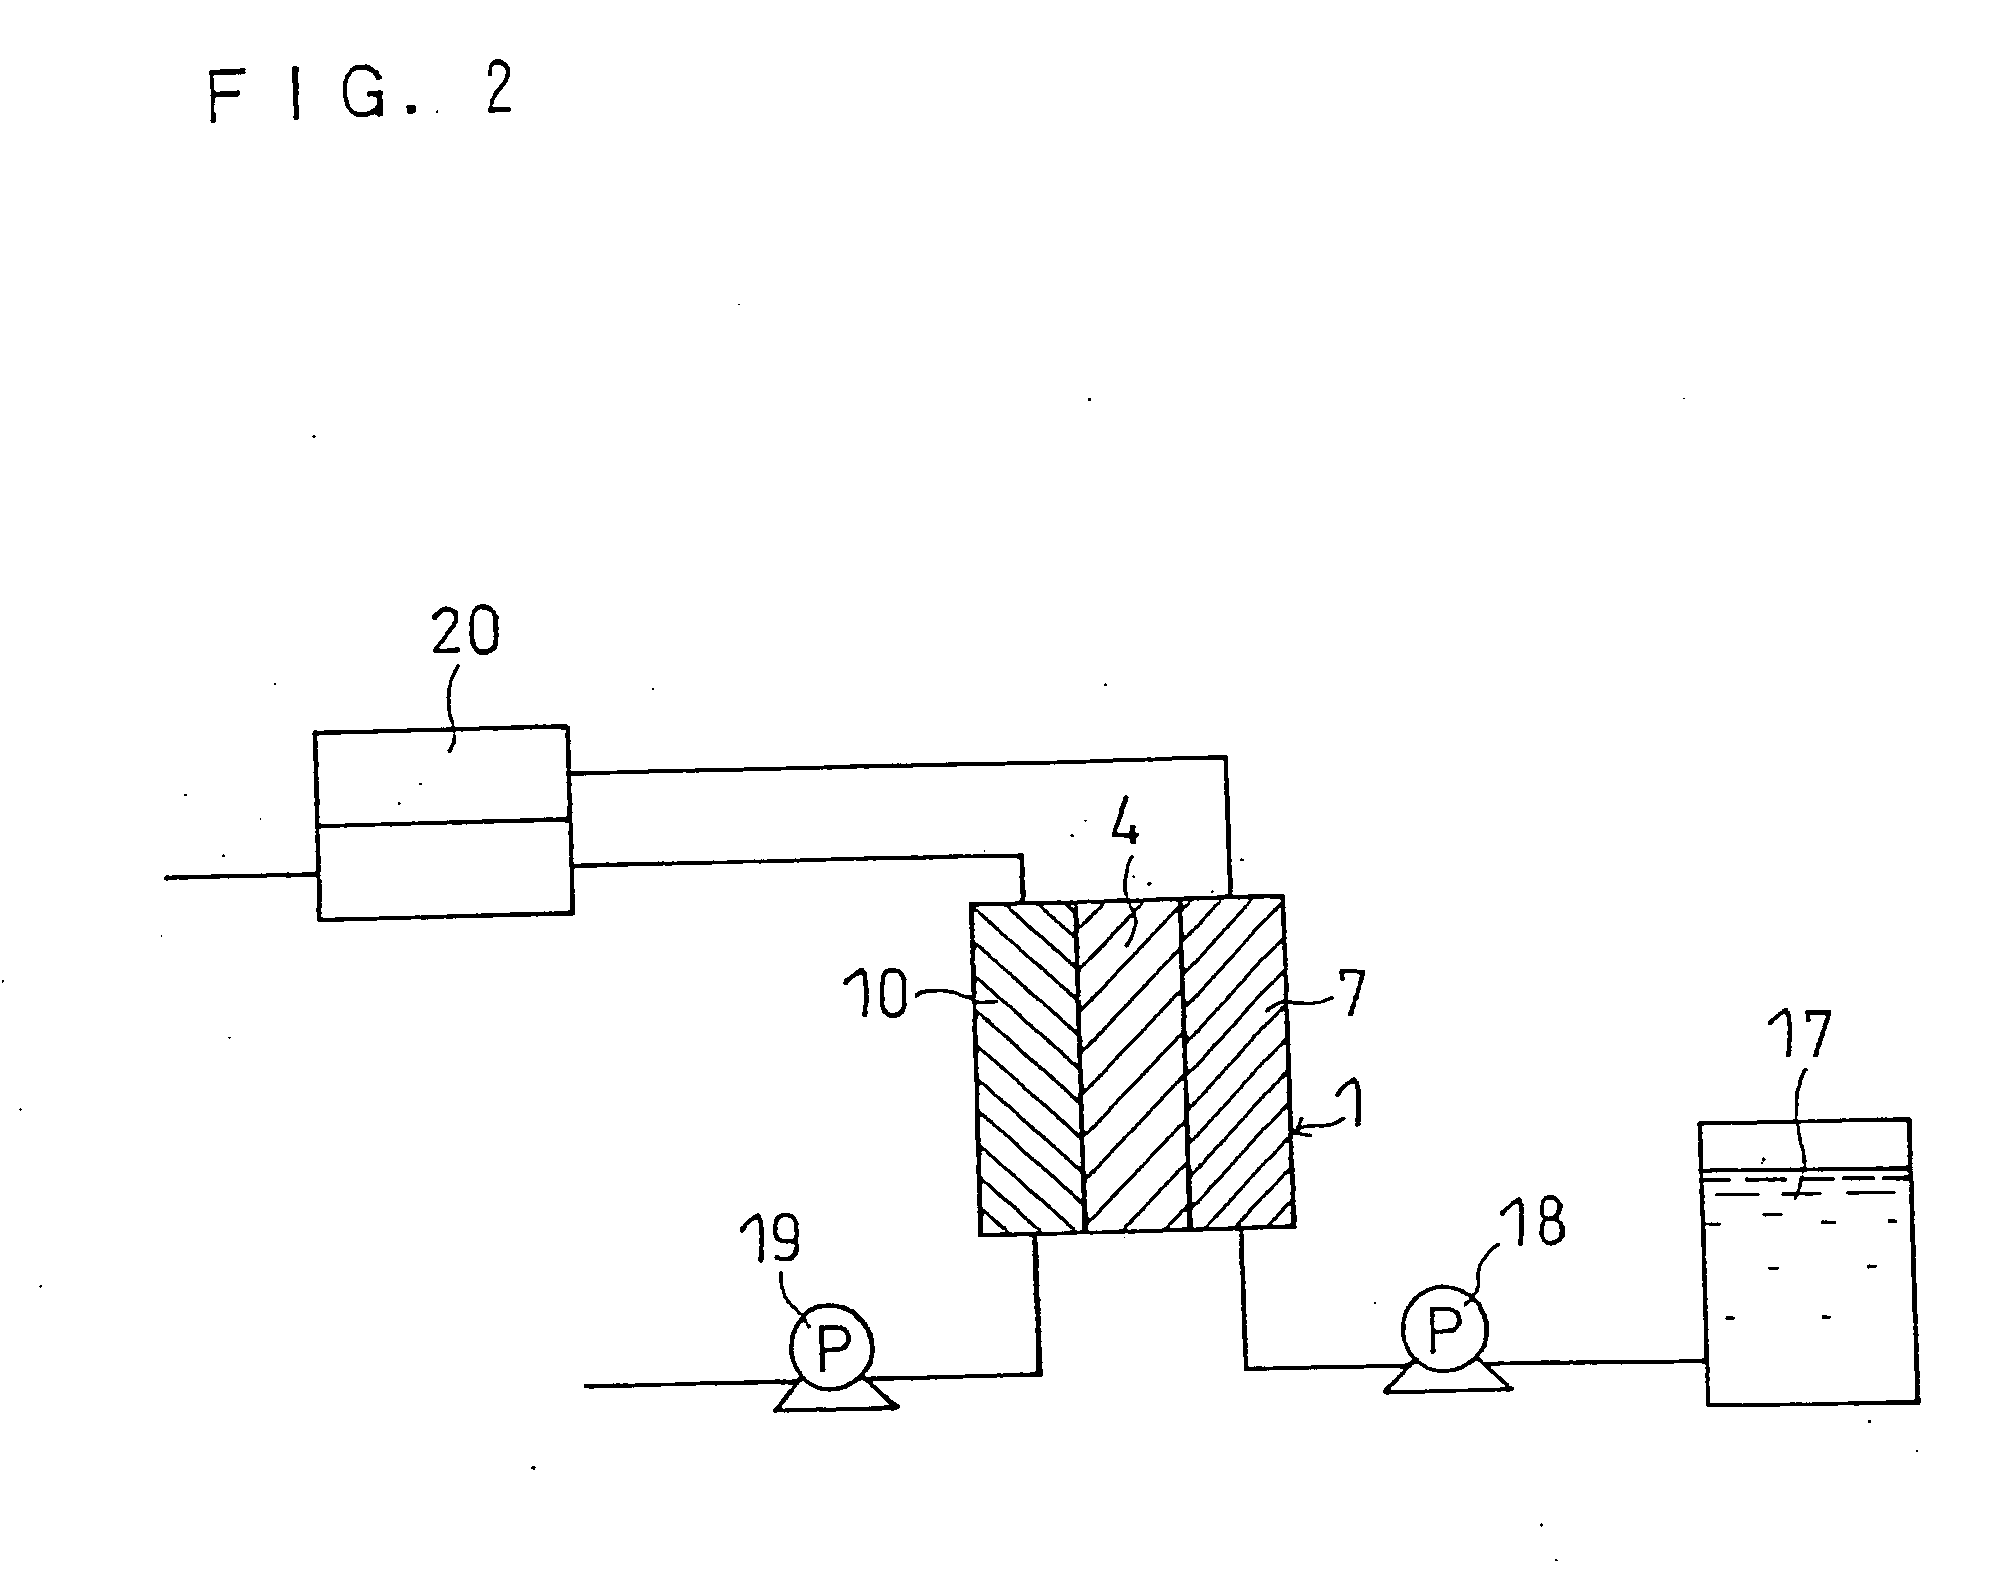 Direct-type fuel cell and direct-type fuel cell system